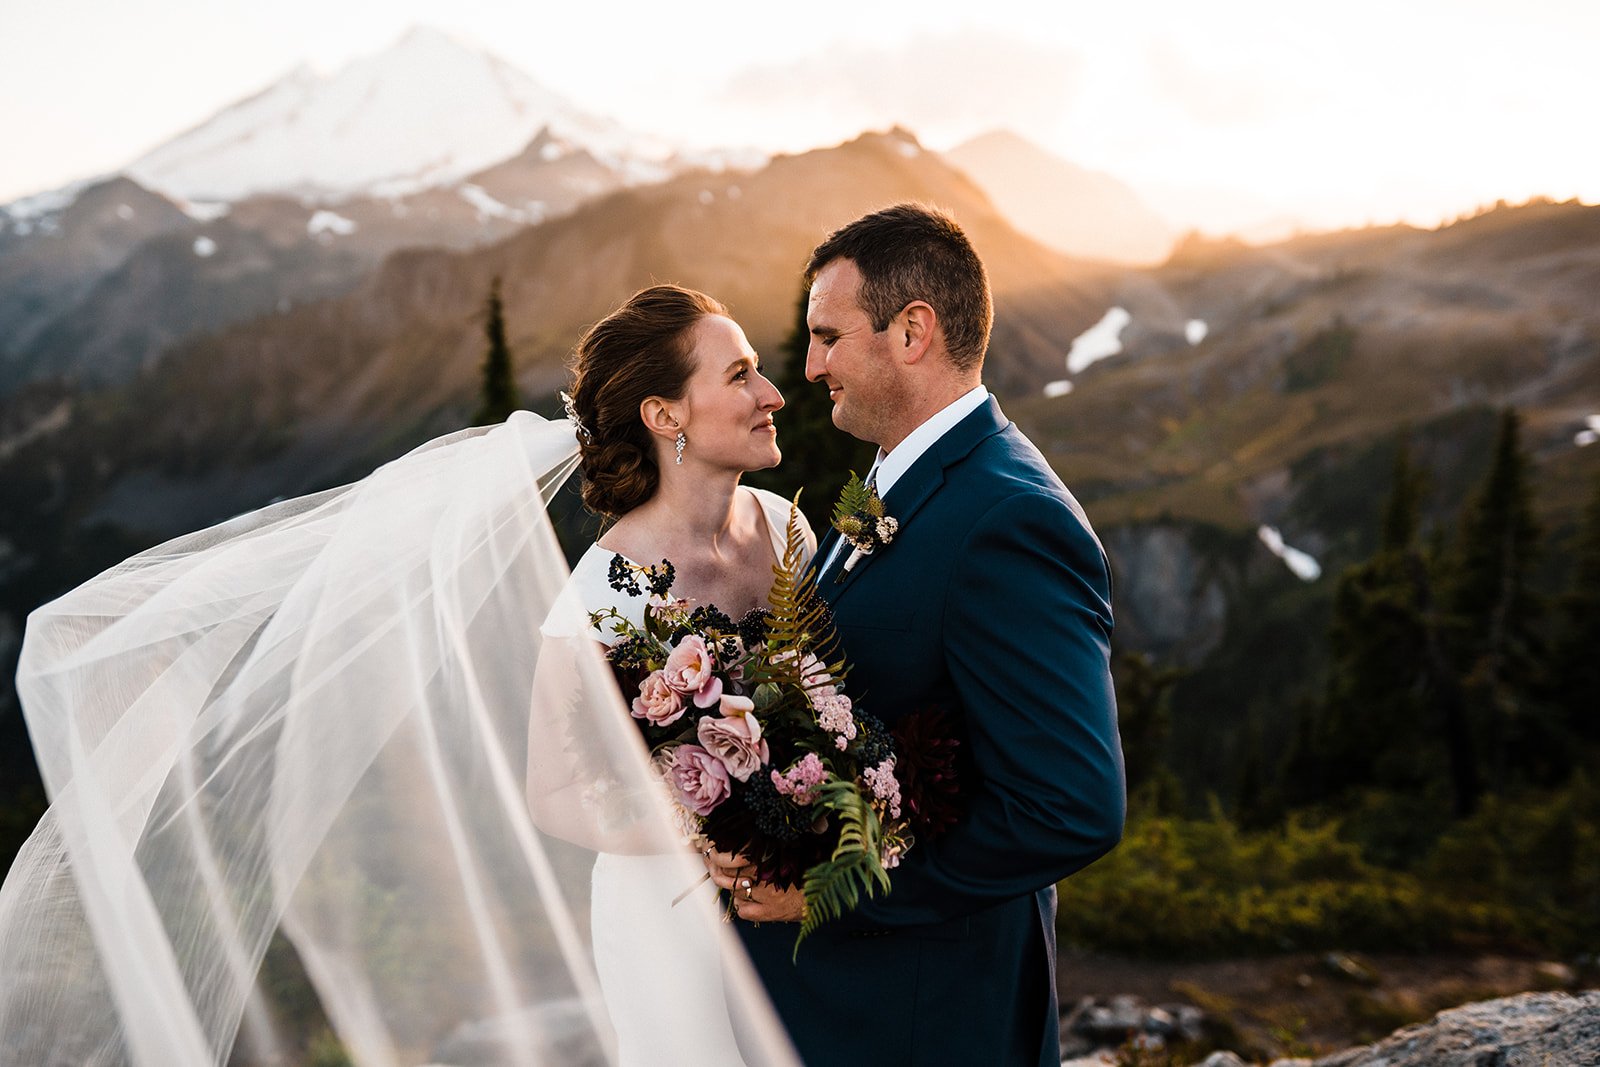 Emily_Ian_North_Cascades_Elopement_The_Foxes_Photography_354.jpg